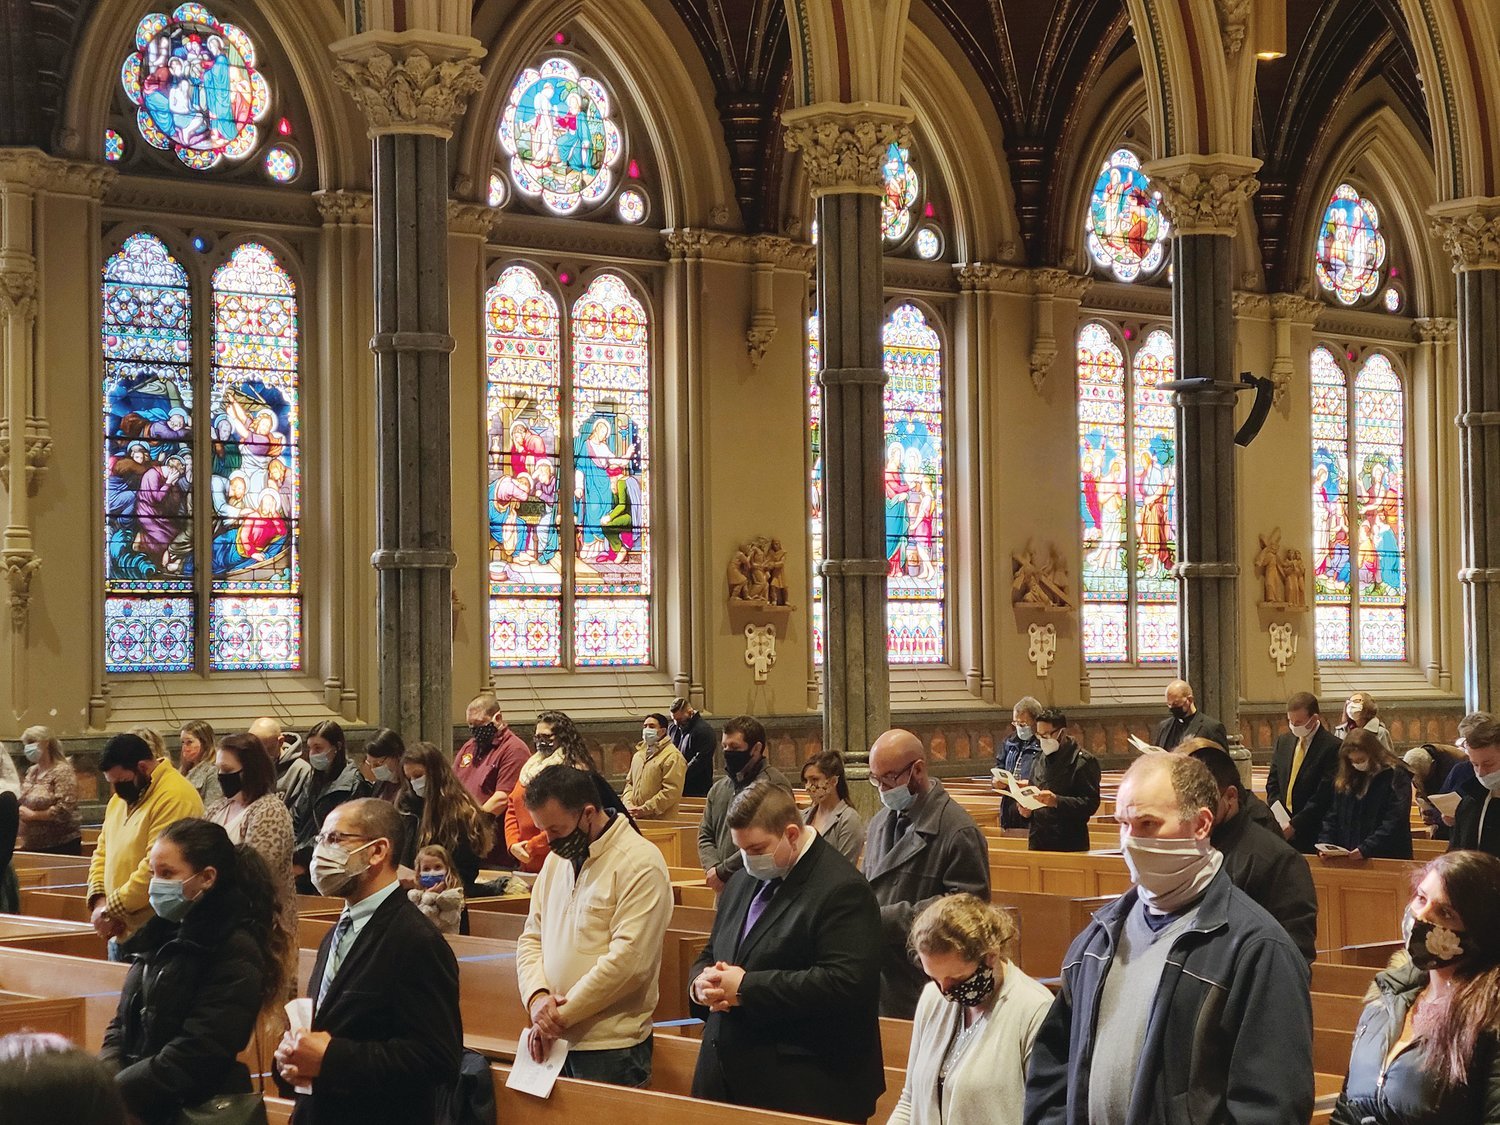 Catechumens and candidates, along with their sponsors, take part in the Rite of Election, which was held on Feb. 21 at the Cathedral of Saints Peter and Paul.